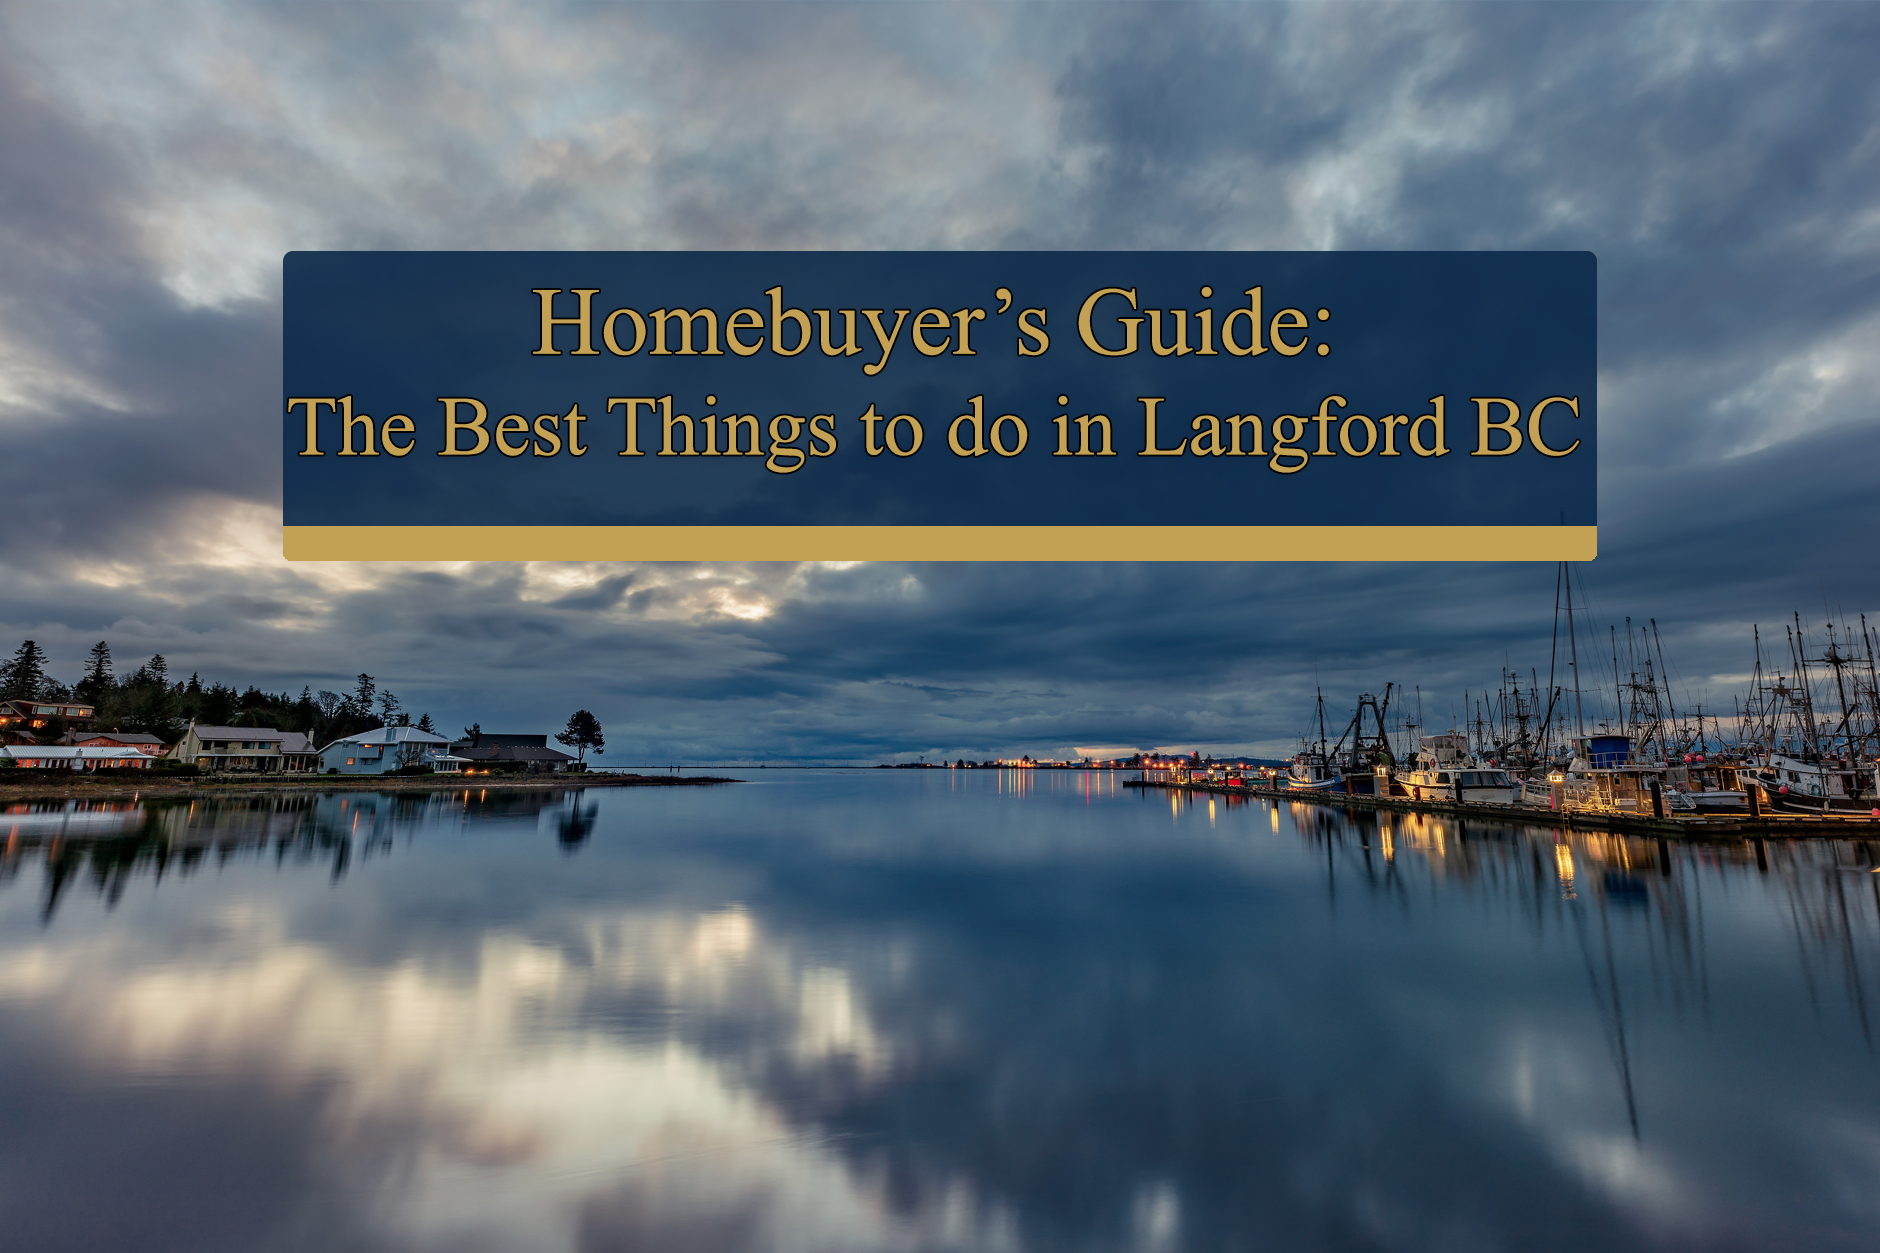 Homebuyer's Guide: The Best Things to do in Langford BC